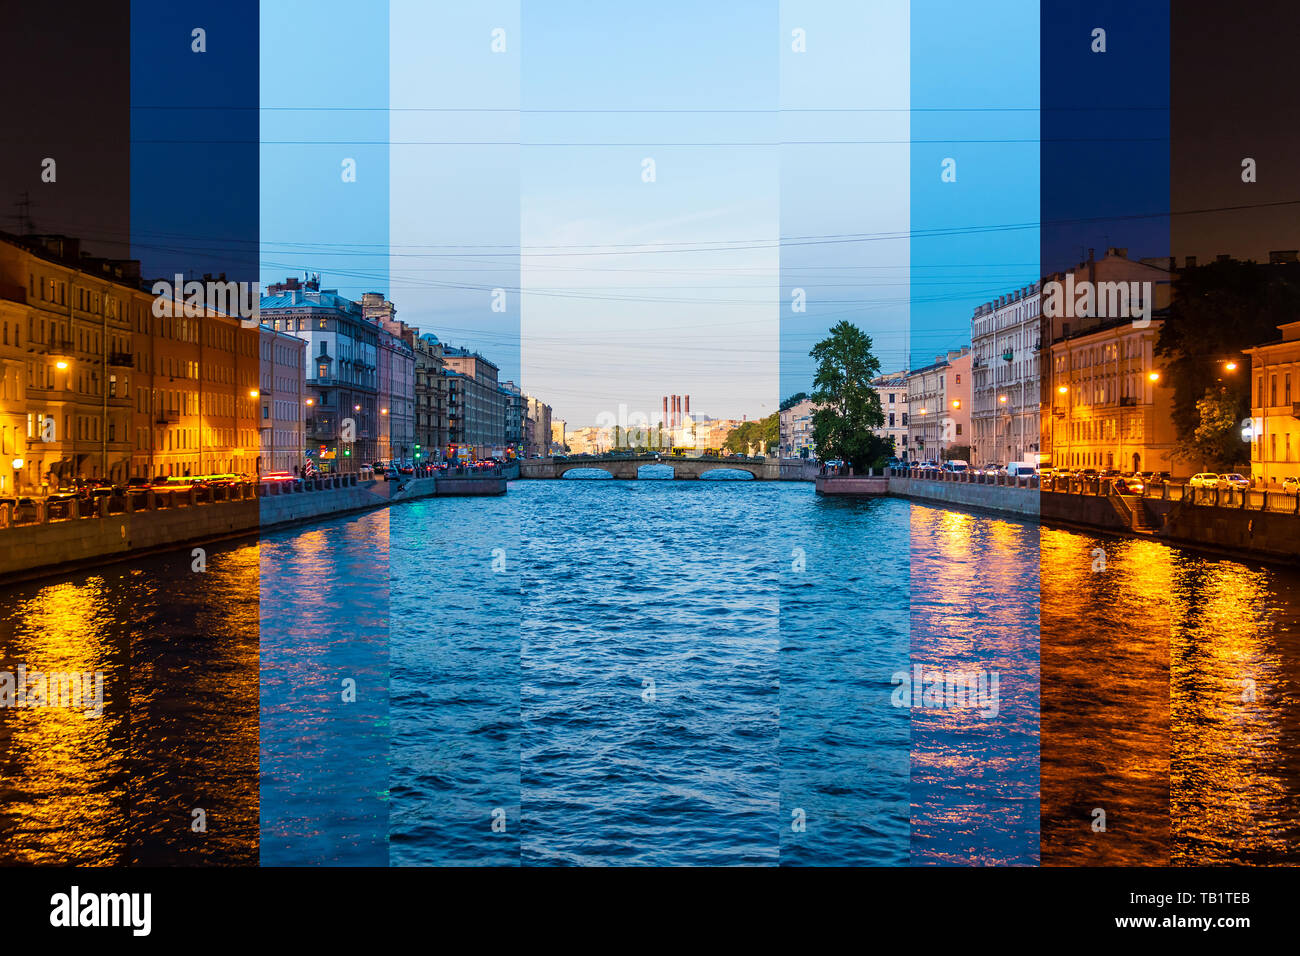 Time-lapse collage of slices of different times of day. Beautiful view of the Fontanka River and historic buildings from the Krasnoarmeyskiy bridge, S Stock Photo